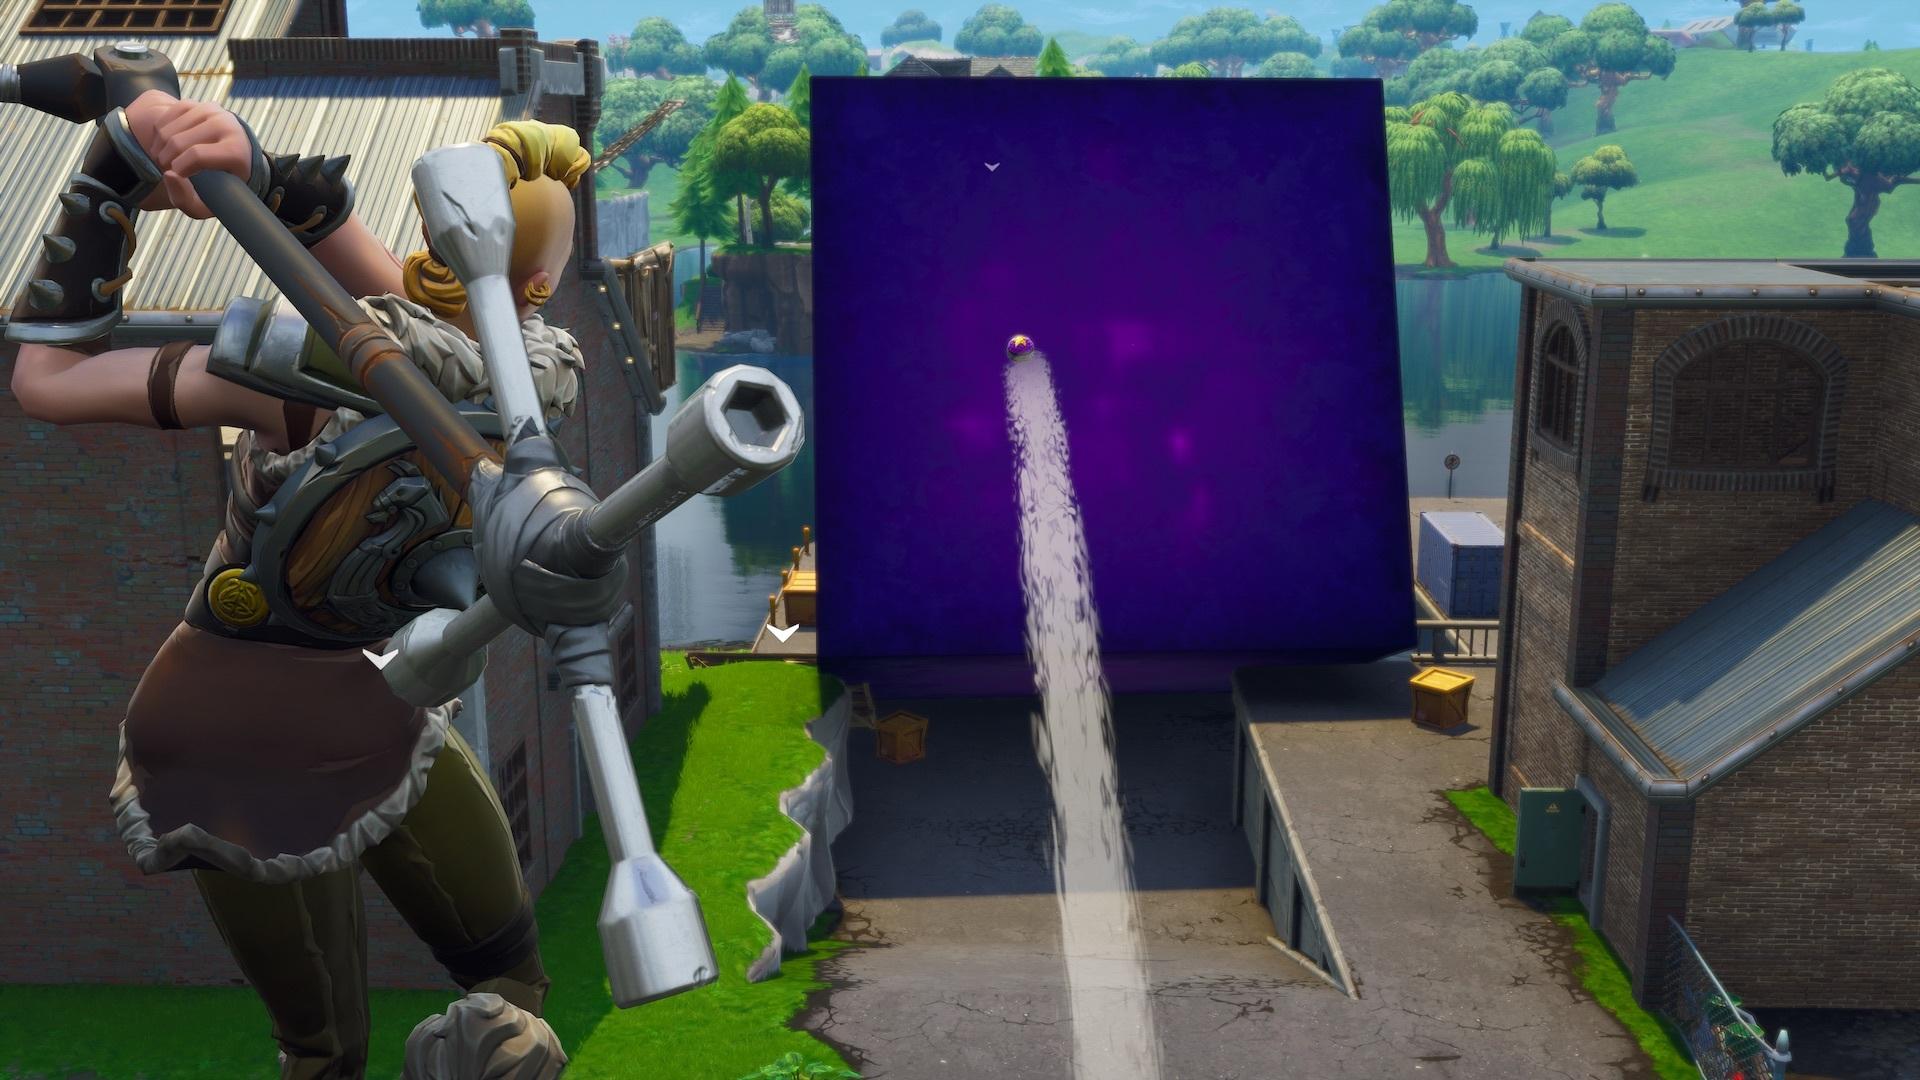 Fortnite: What's Up With The Cube And Loot Lake? Season 6 Theories